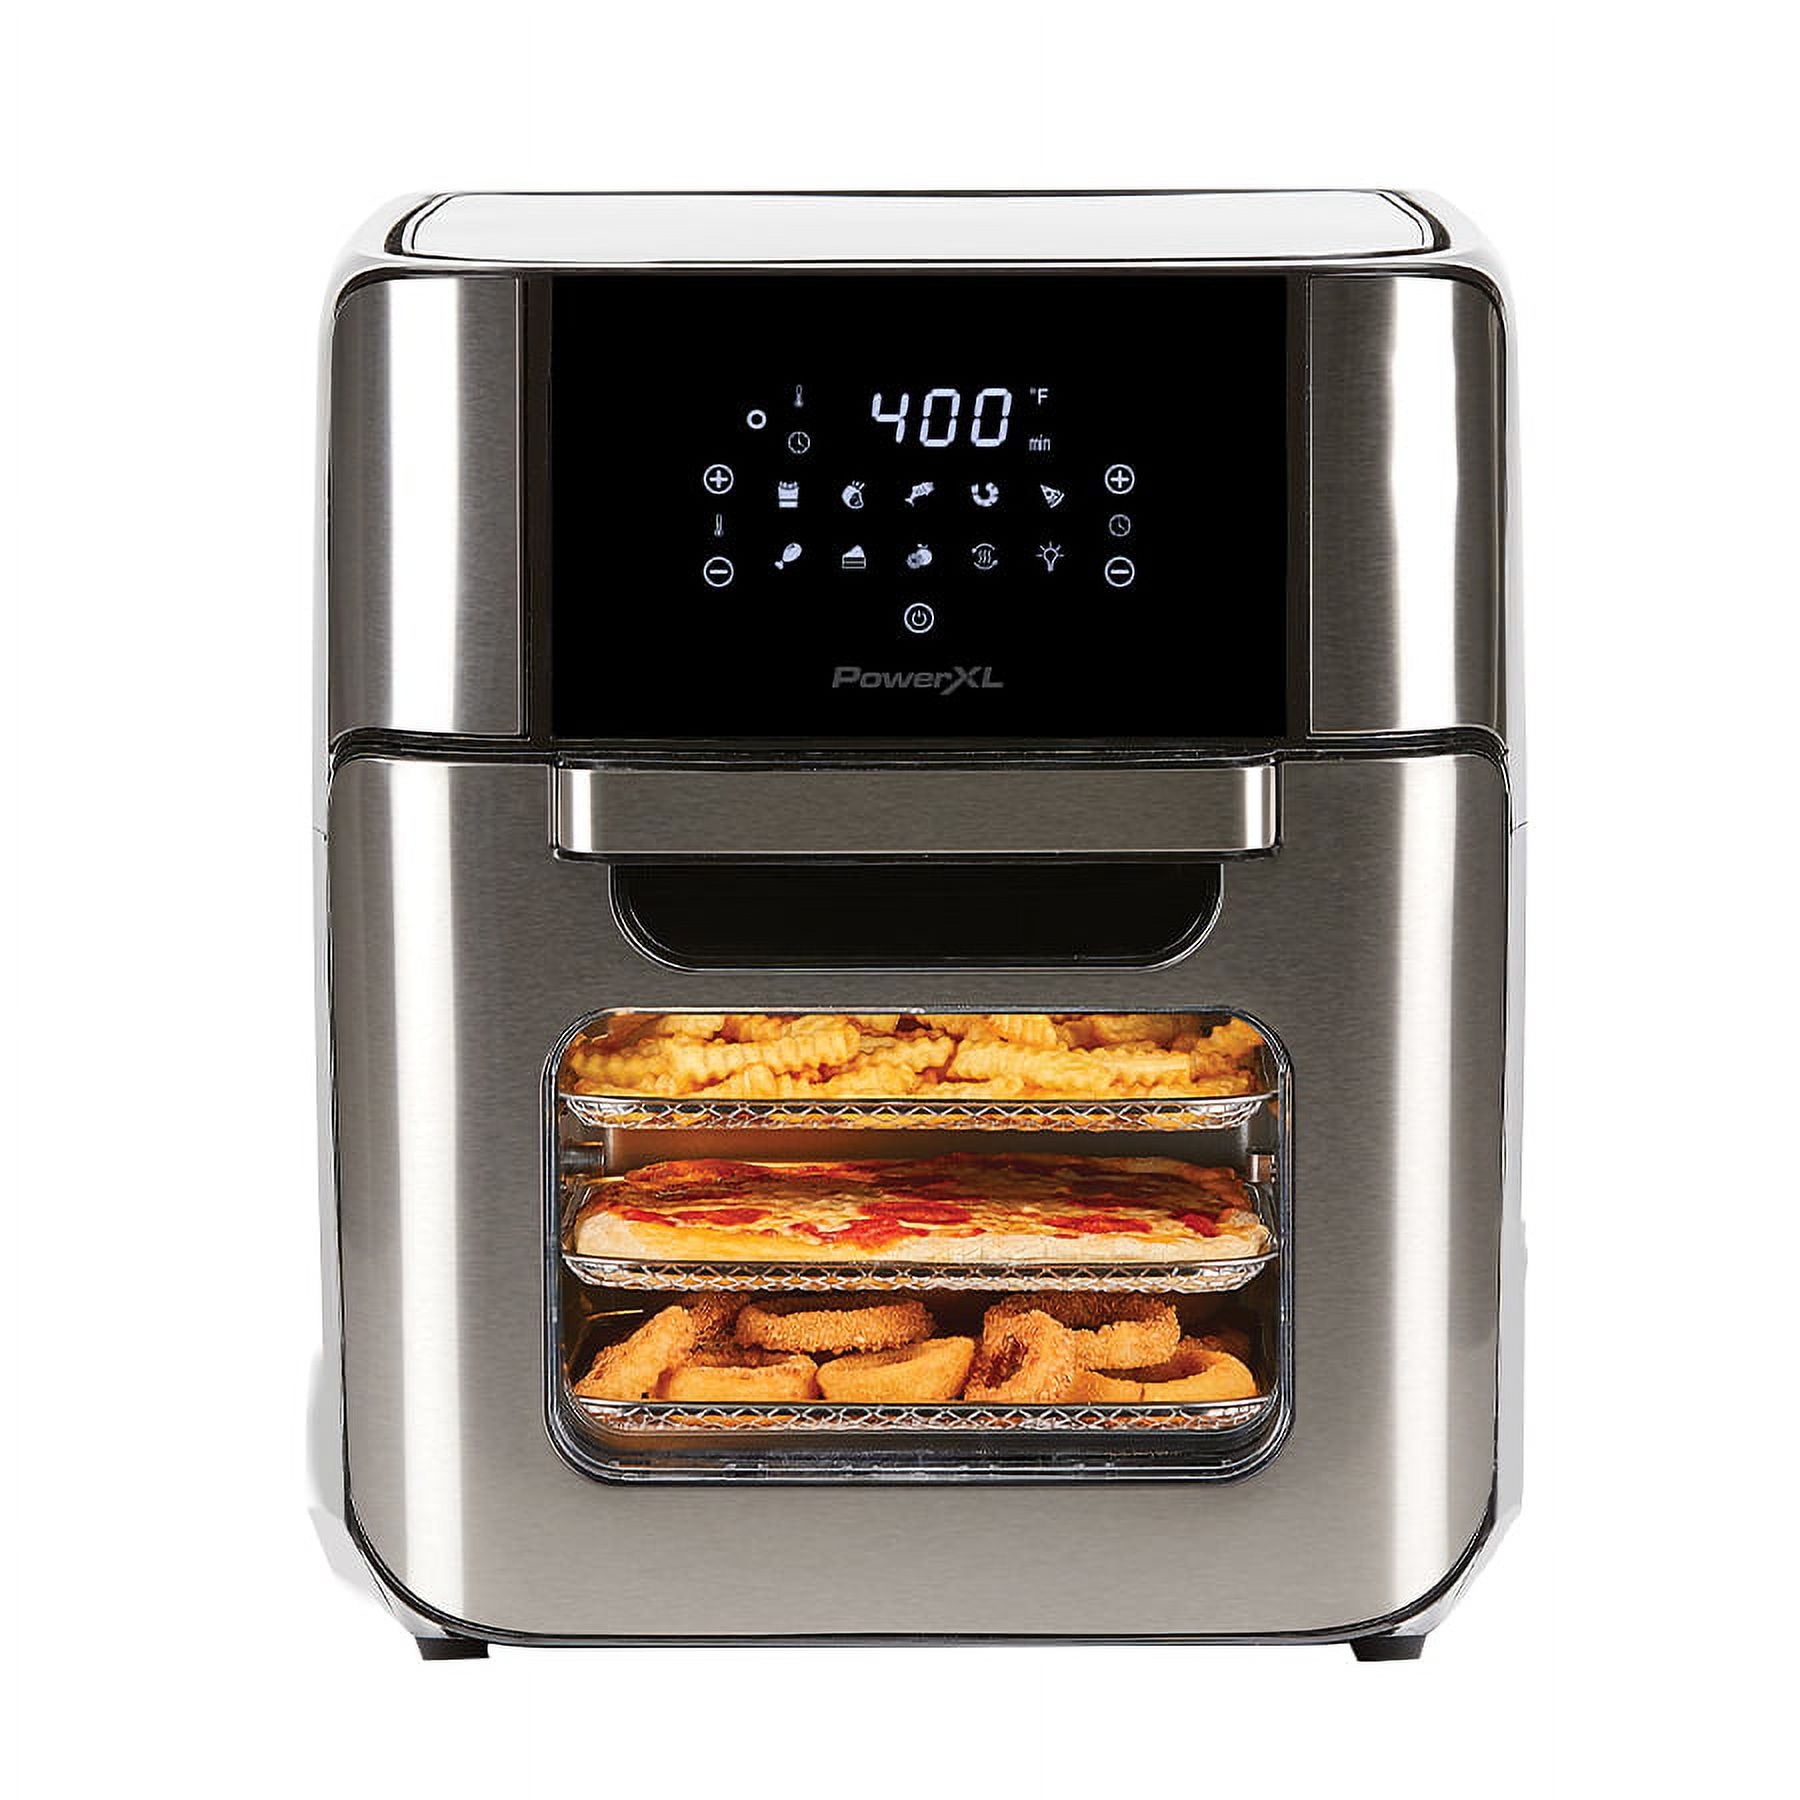 PowerXL Air Fryer Pro Plus Extra-Large 12 Quart Air Fryer Oven Multi-Cooker, Stainless Steel, 1700 Watts - image 4 of 5